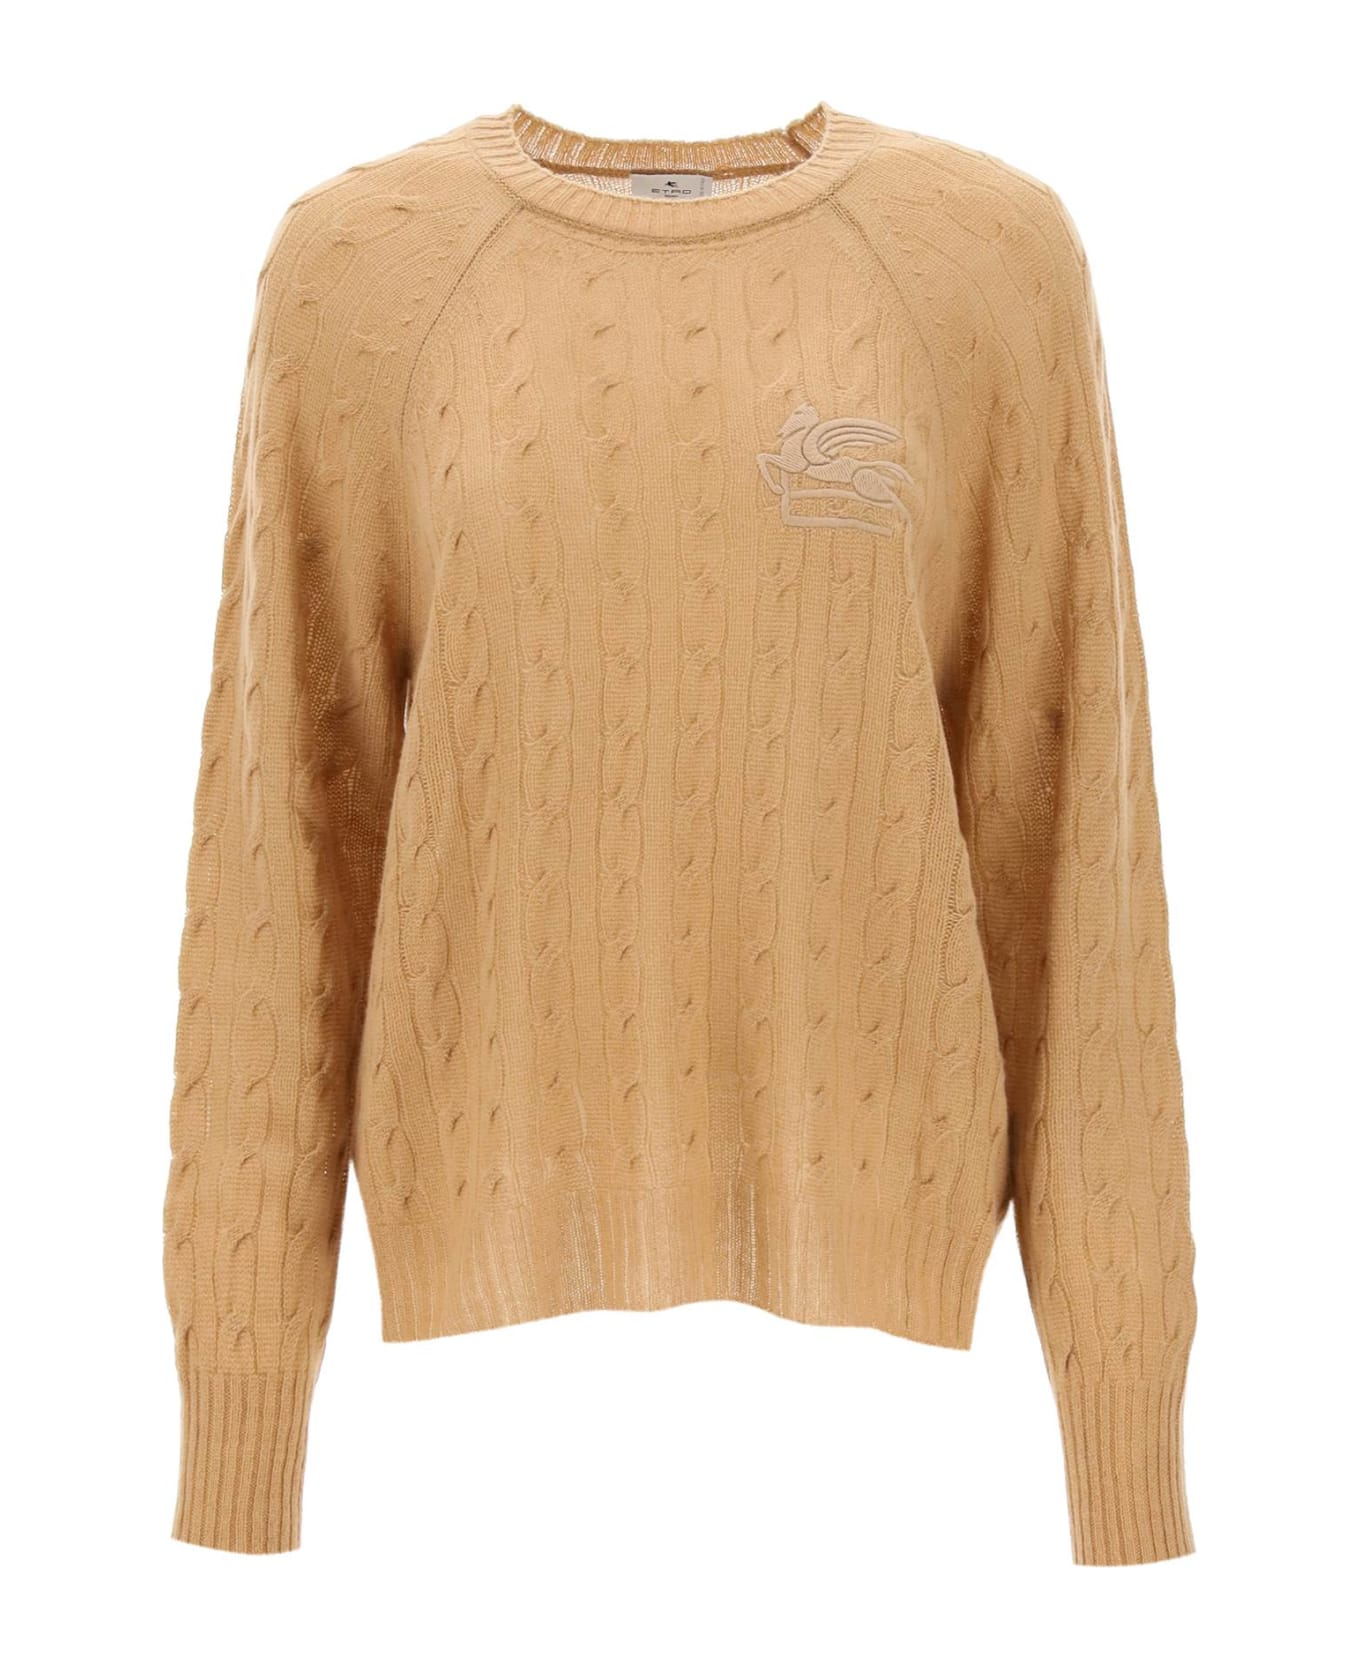 Etro Cashmere Sweater With Pegasus Embroidery - BEIGE (Beige)